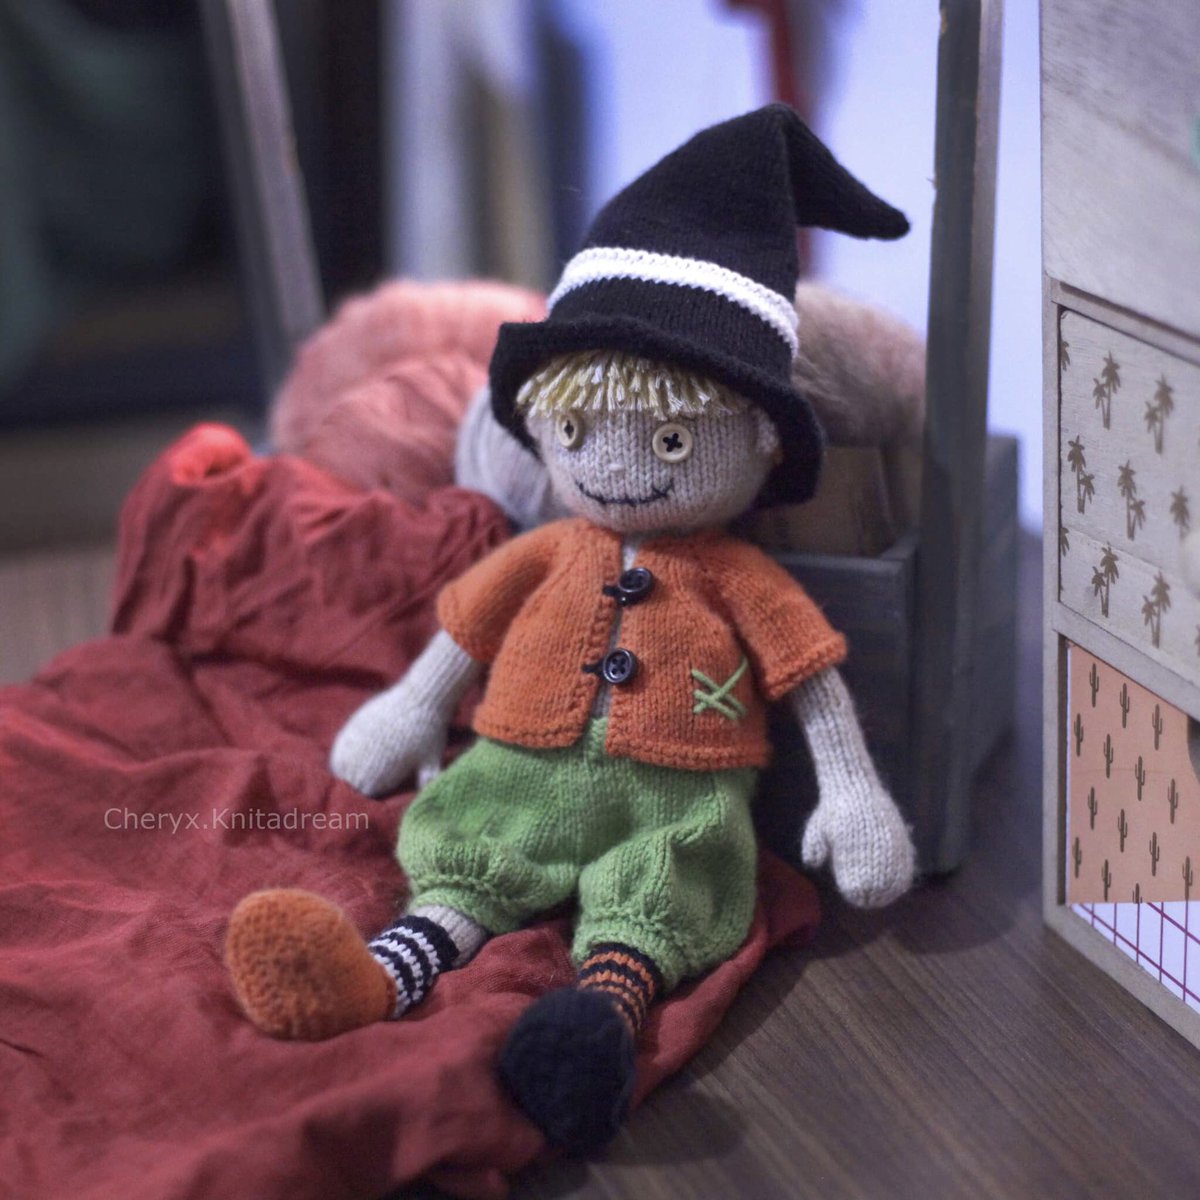 He is a knitted doll named Charlie, who is a mysterious guest who visits your house at midnight. 👻

The pattern is available on Cheryx.com
————
 #halloweenknitting #halloweenknittingpattern #halloweendoll #halloweendolls #knittingdoll #knittingdolls #knitteddoll